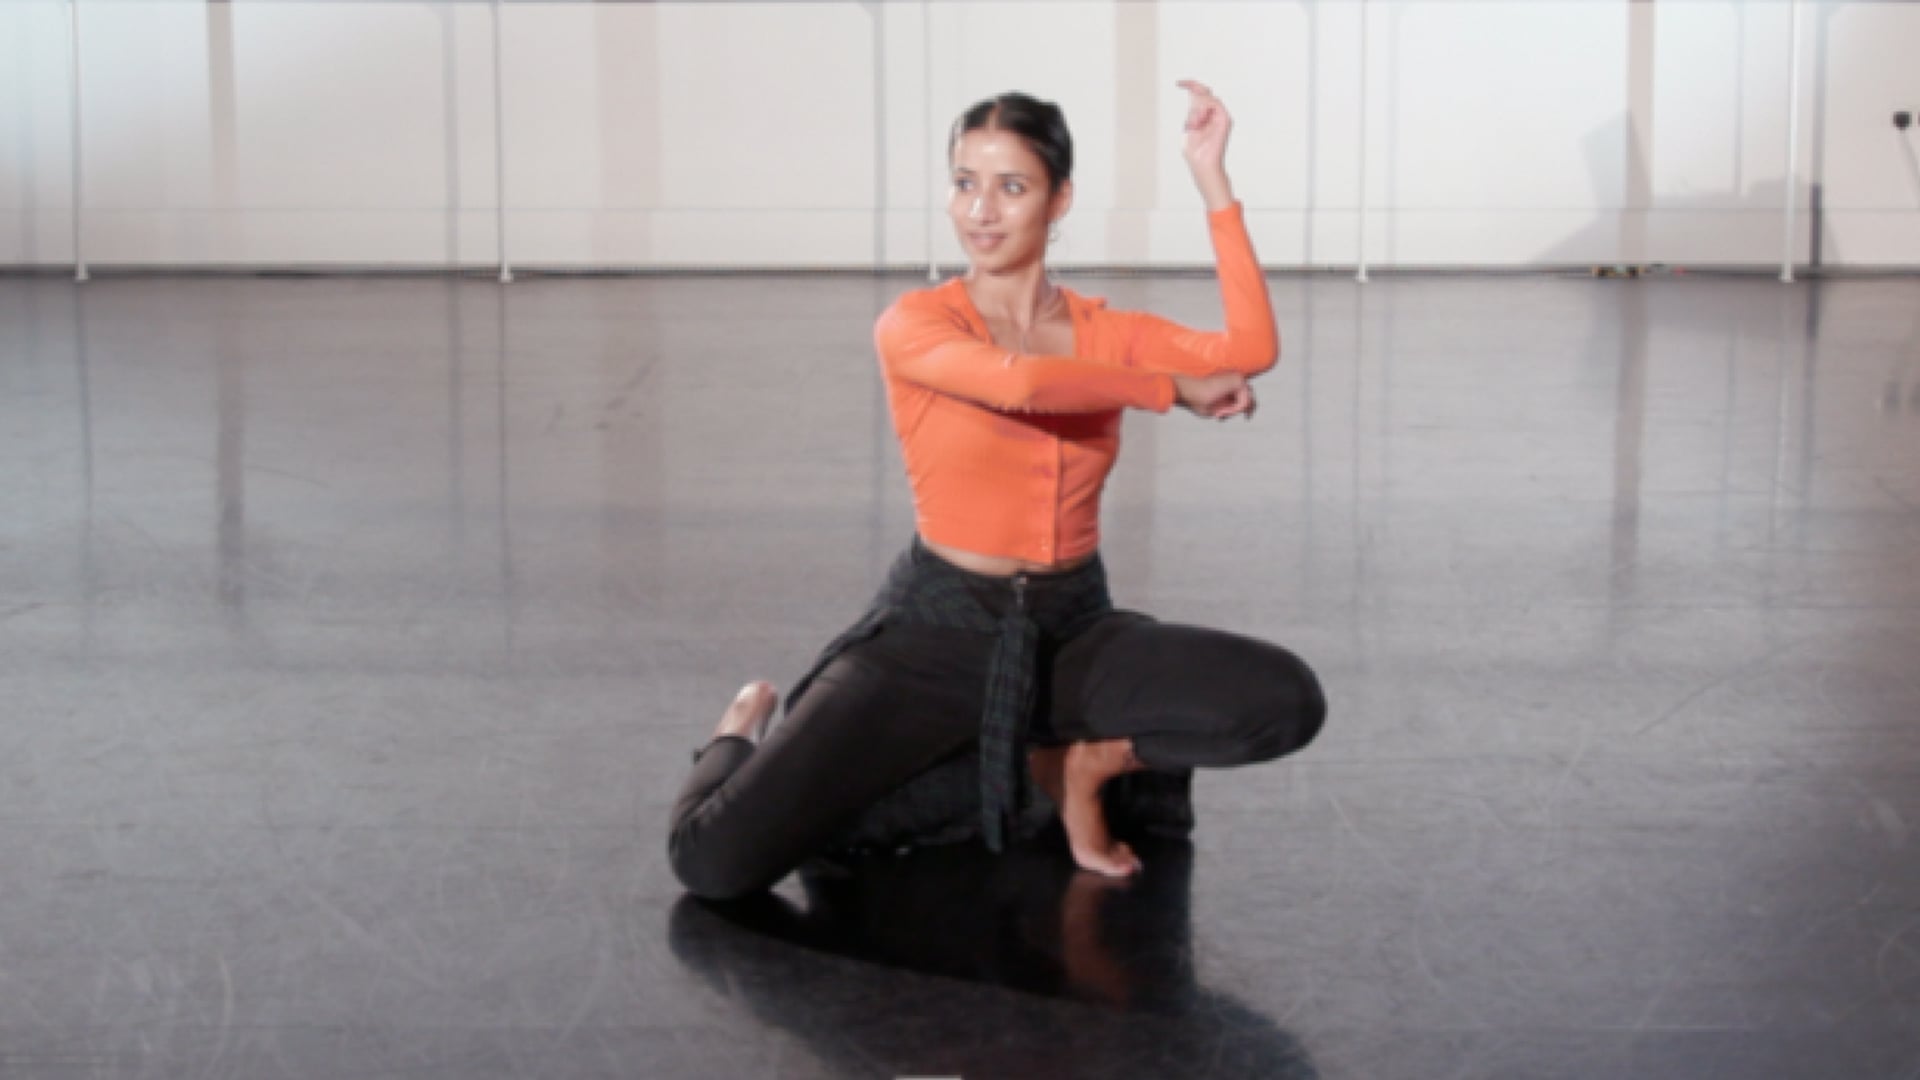 a woman in an orange shirt is doing a yoga pose.